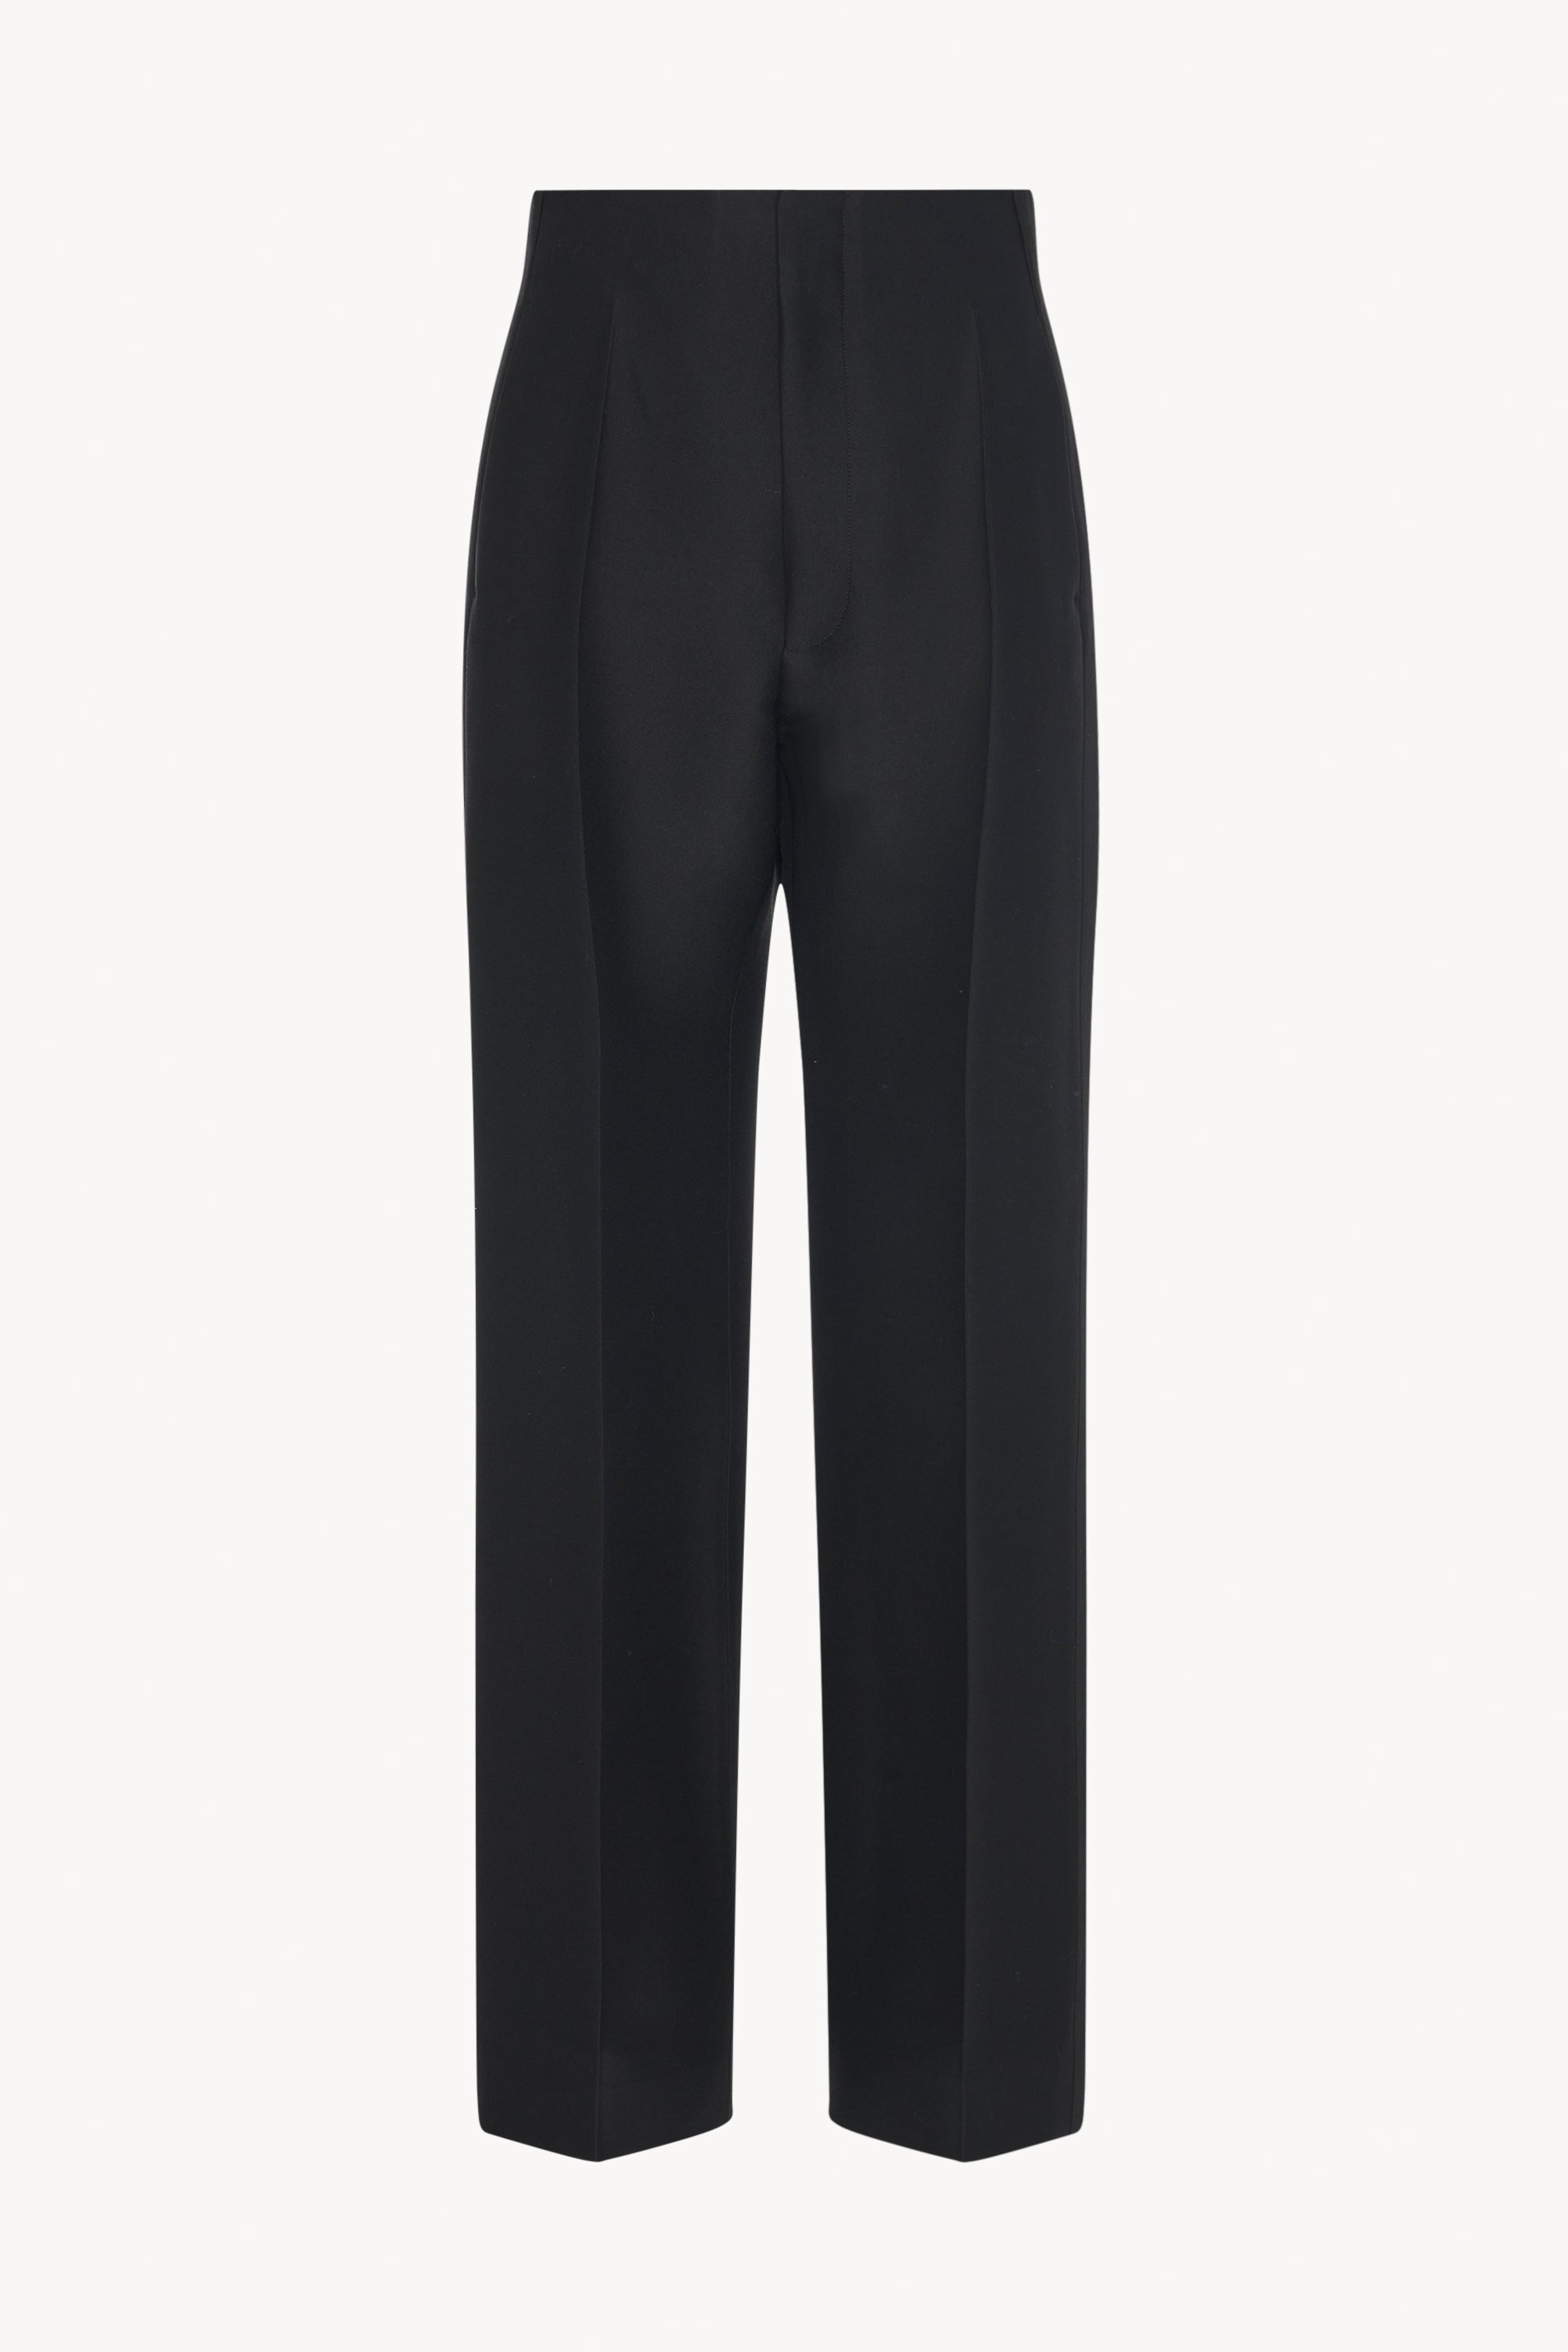 Hector Pant in Wool and Silk - 1